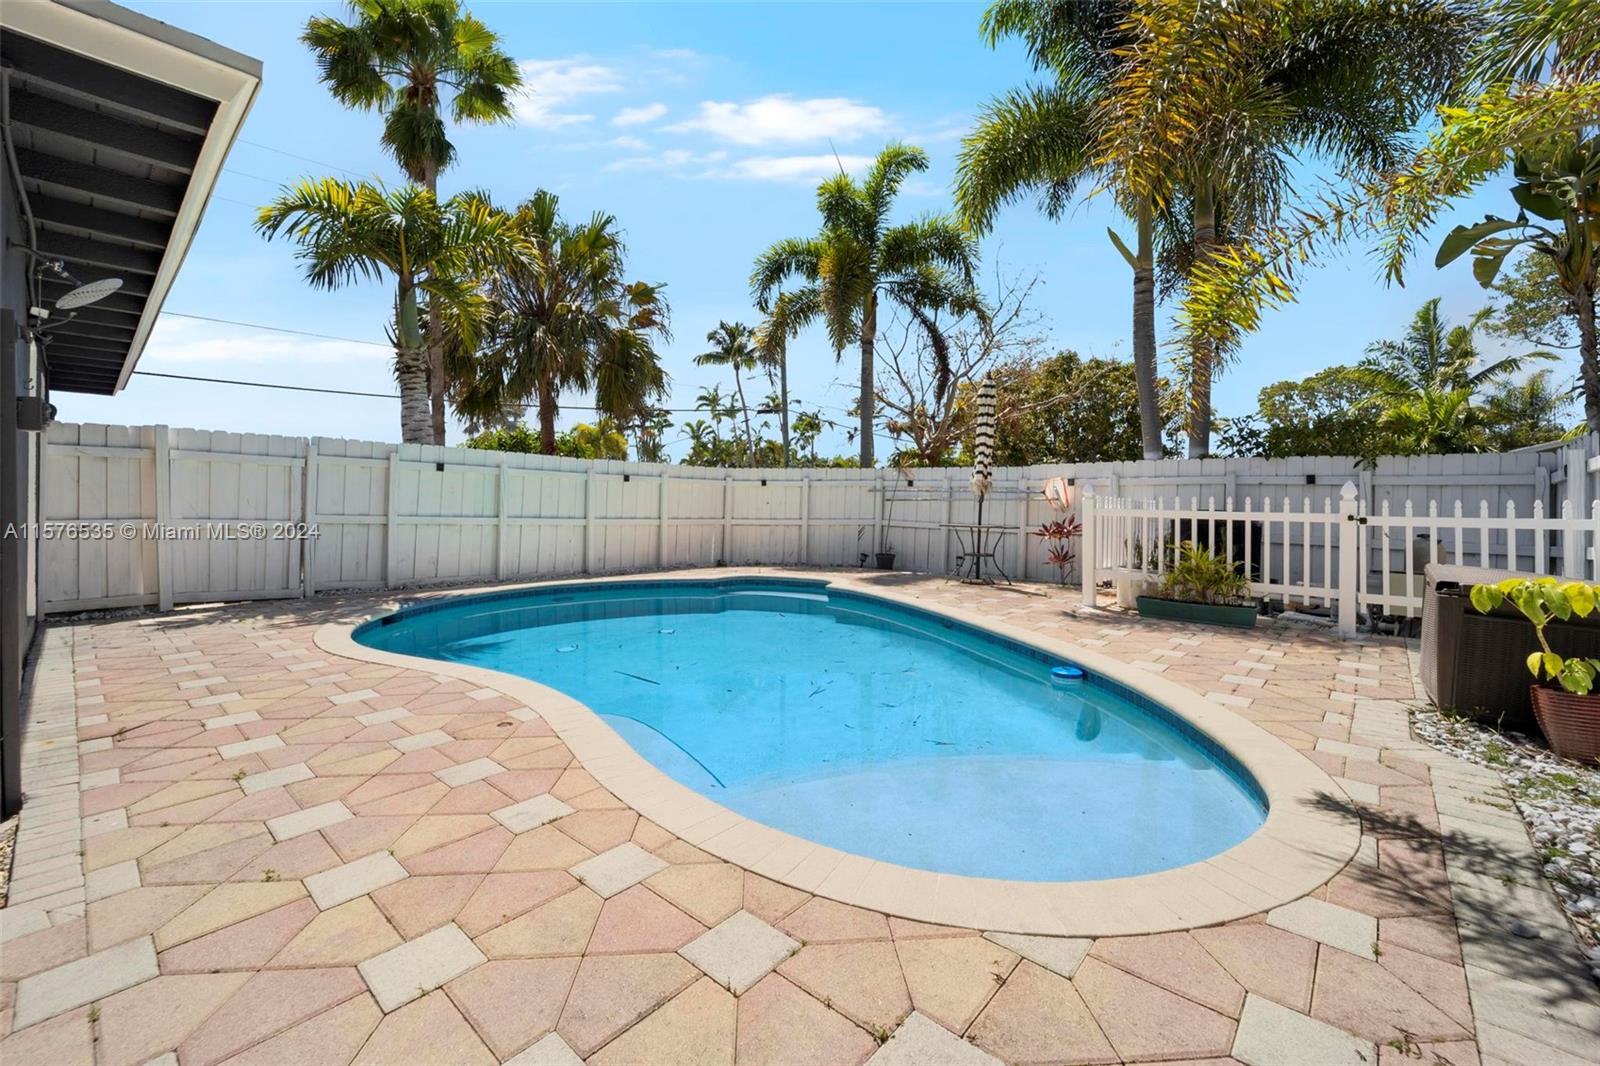 View Wilton Manors, FL 33311 house